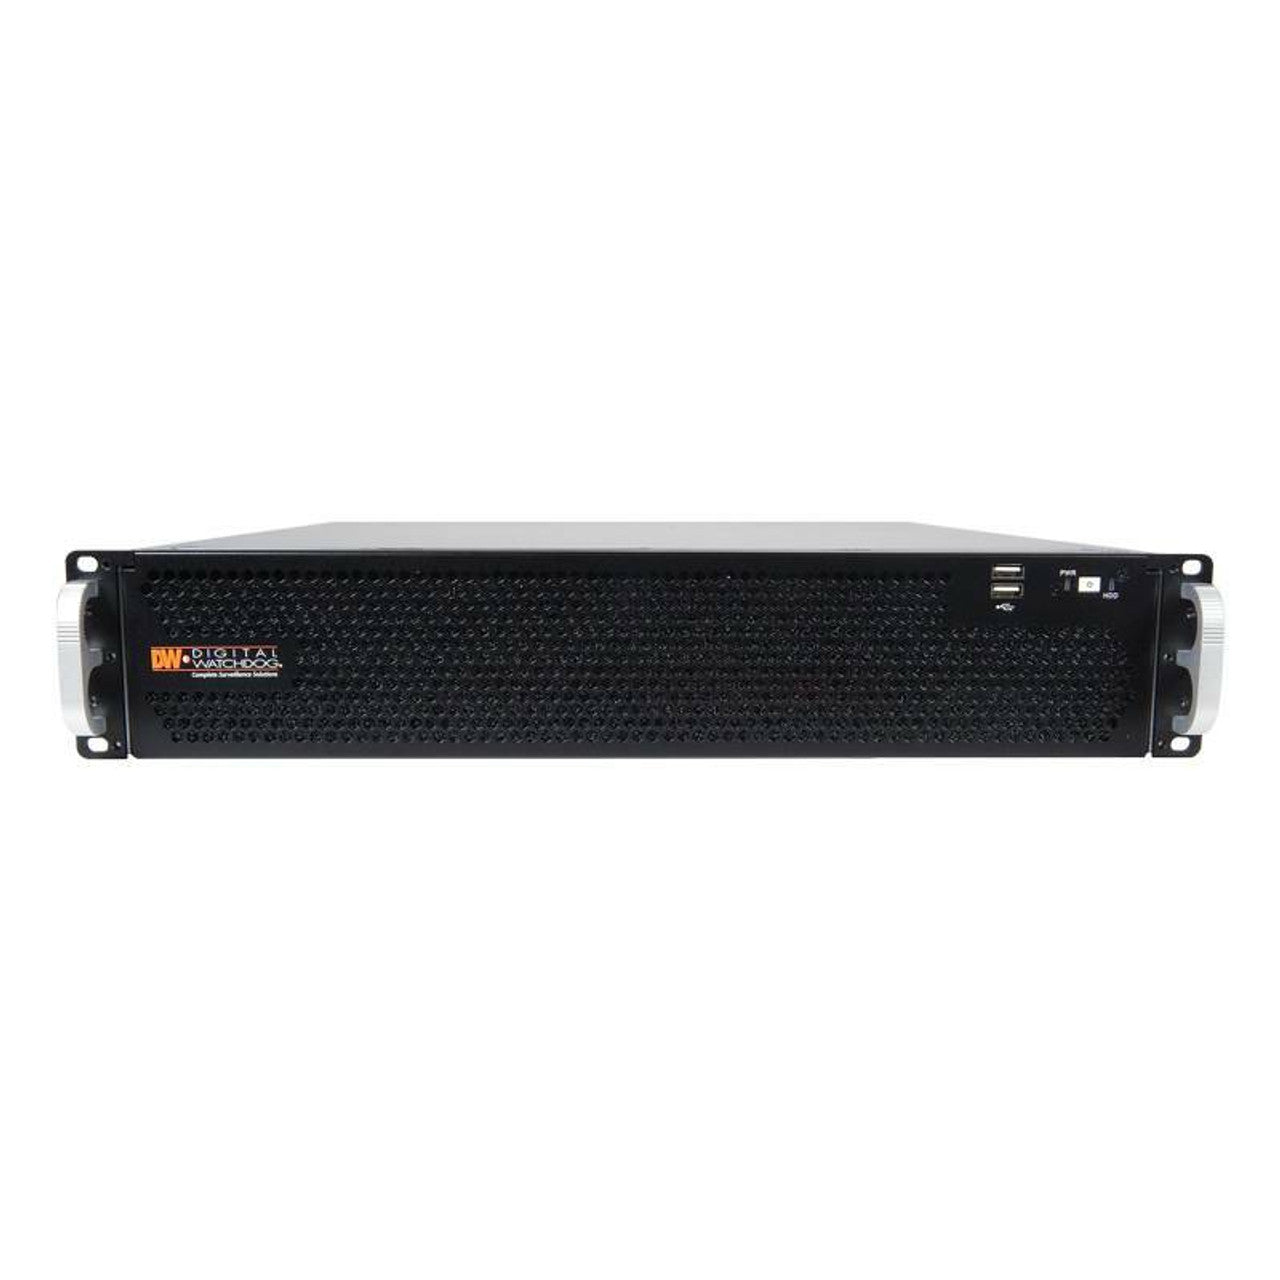 Digital Watchdog DW-BJP2U32T 128-Channel NVR with 32TB Hard Drive included, Up to 128 Channel, Blackjack P-Rack